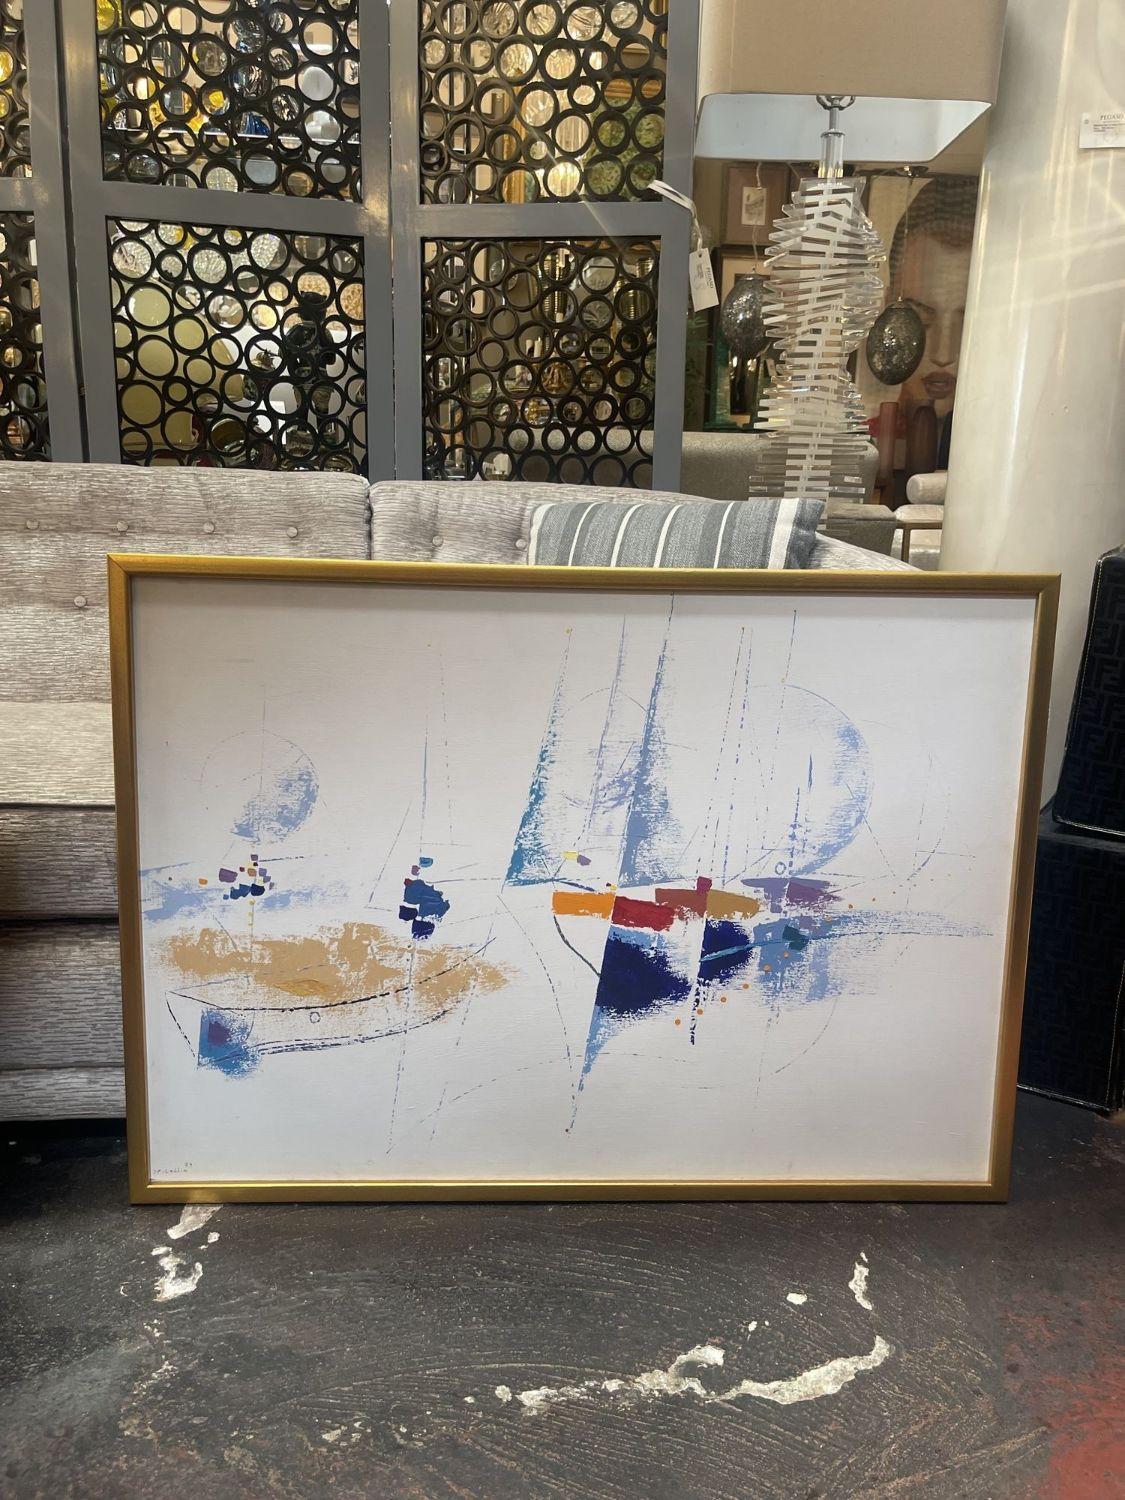 Painting on canvas of abstract sailboats by Jean-Pierre Collin (1979). Newly framed with a beautiful gold tone wooden frame.